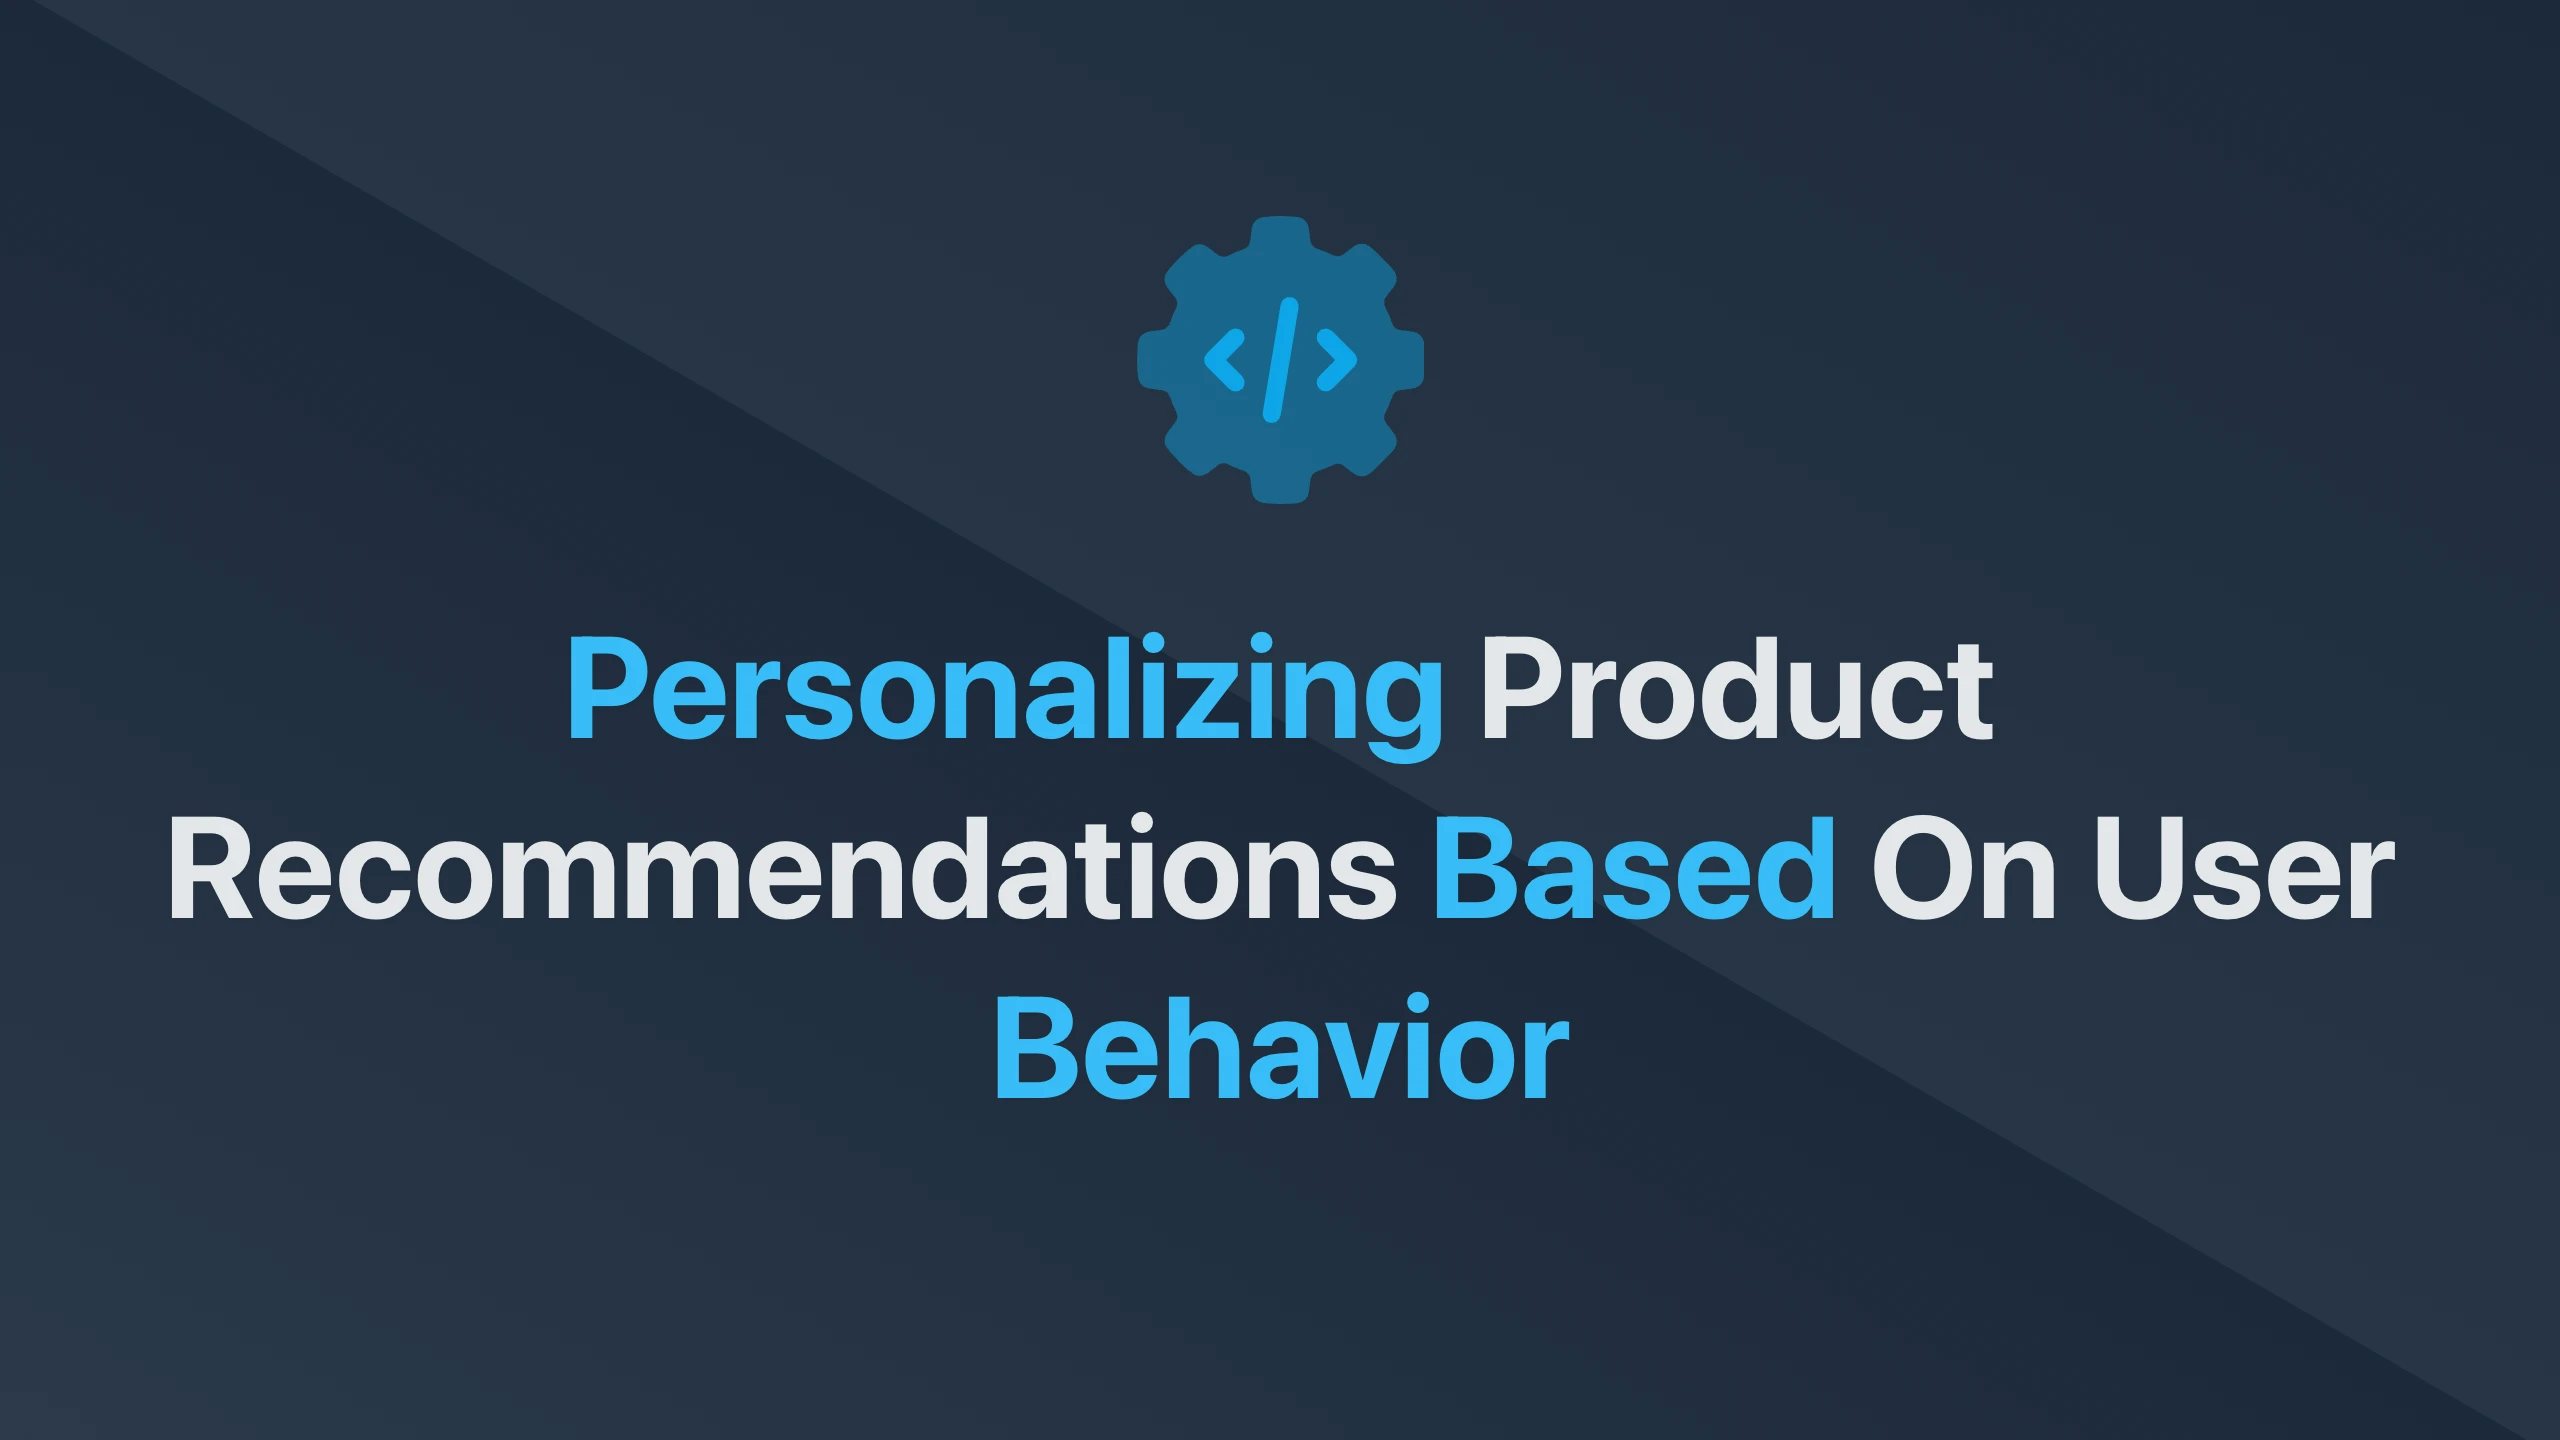 Cover Image for Personalizing Product Recommendations Based on User Behavior